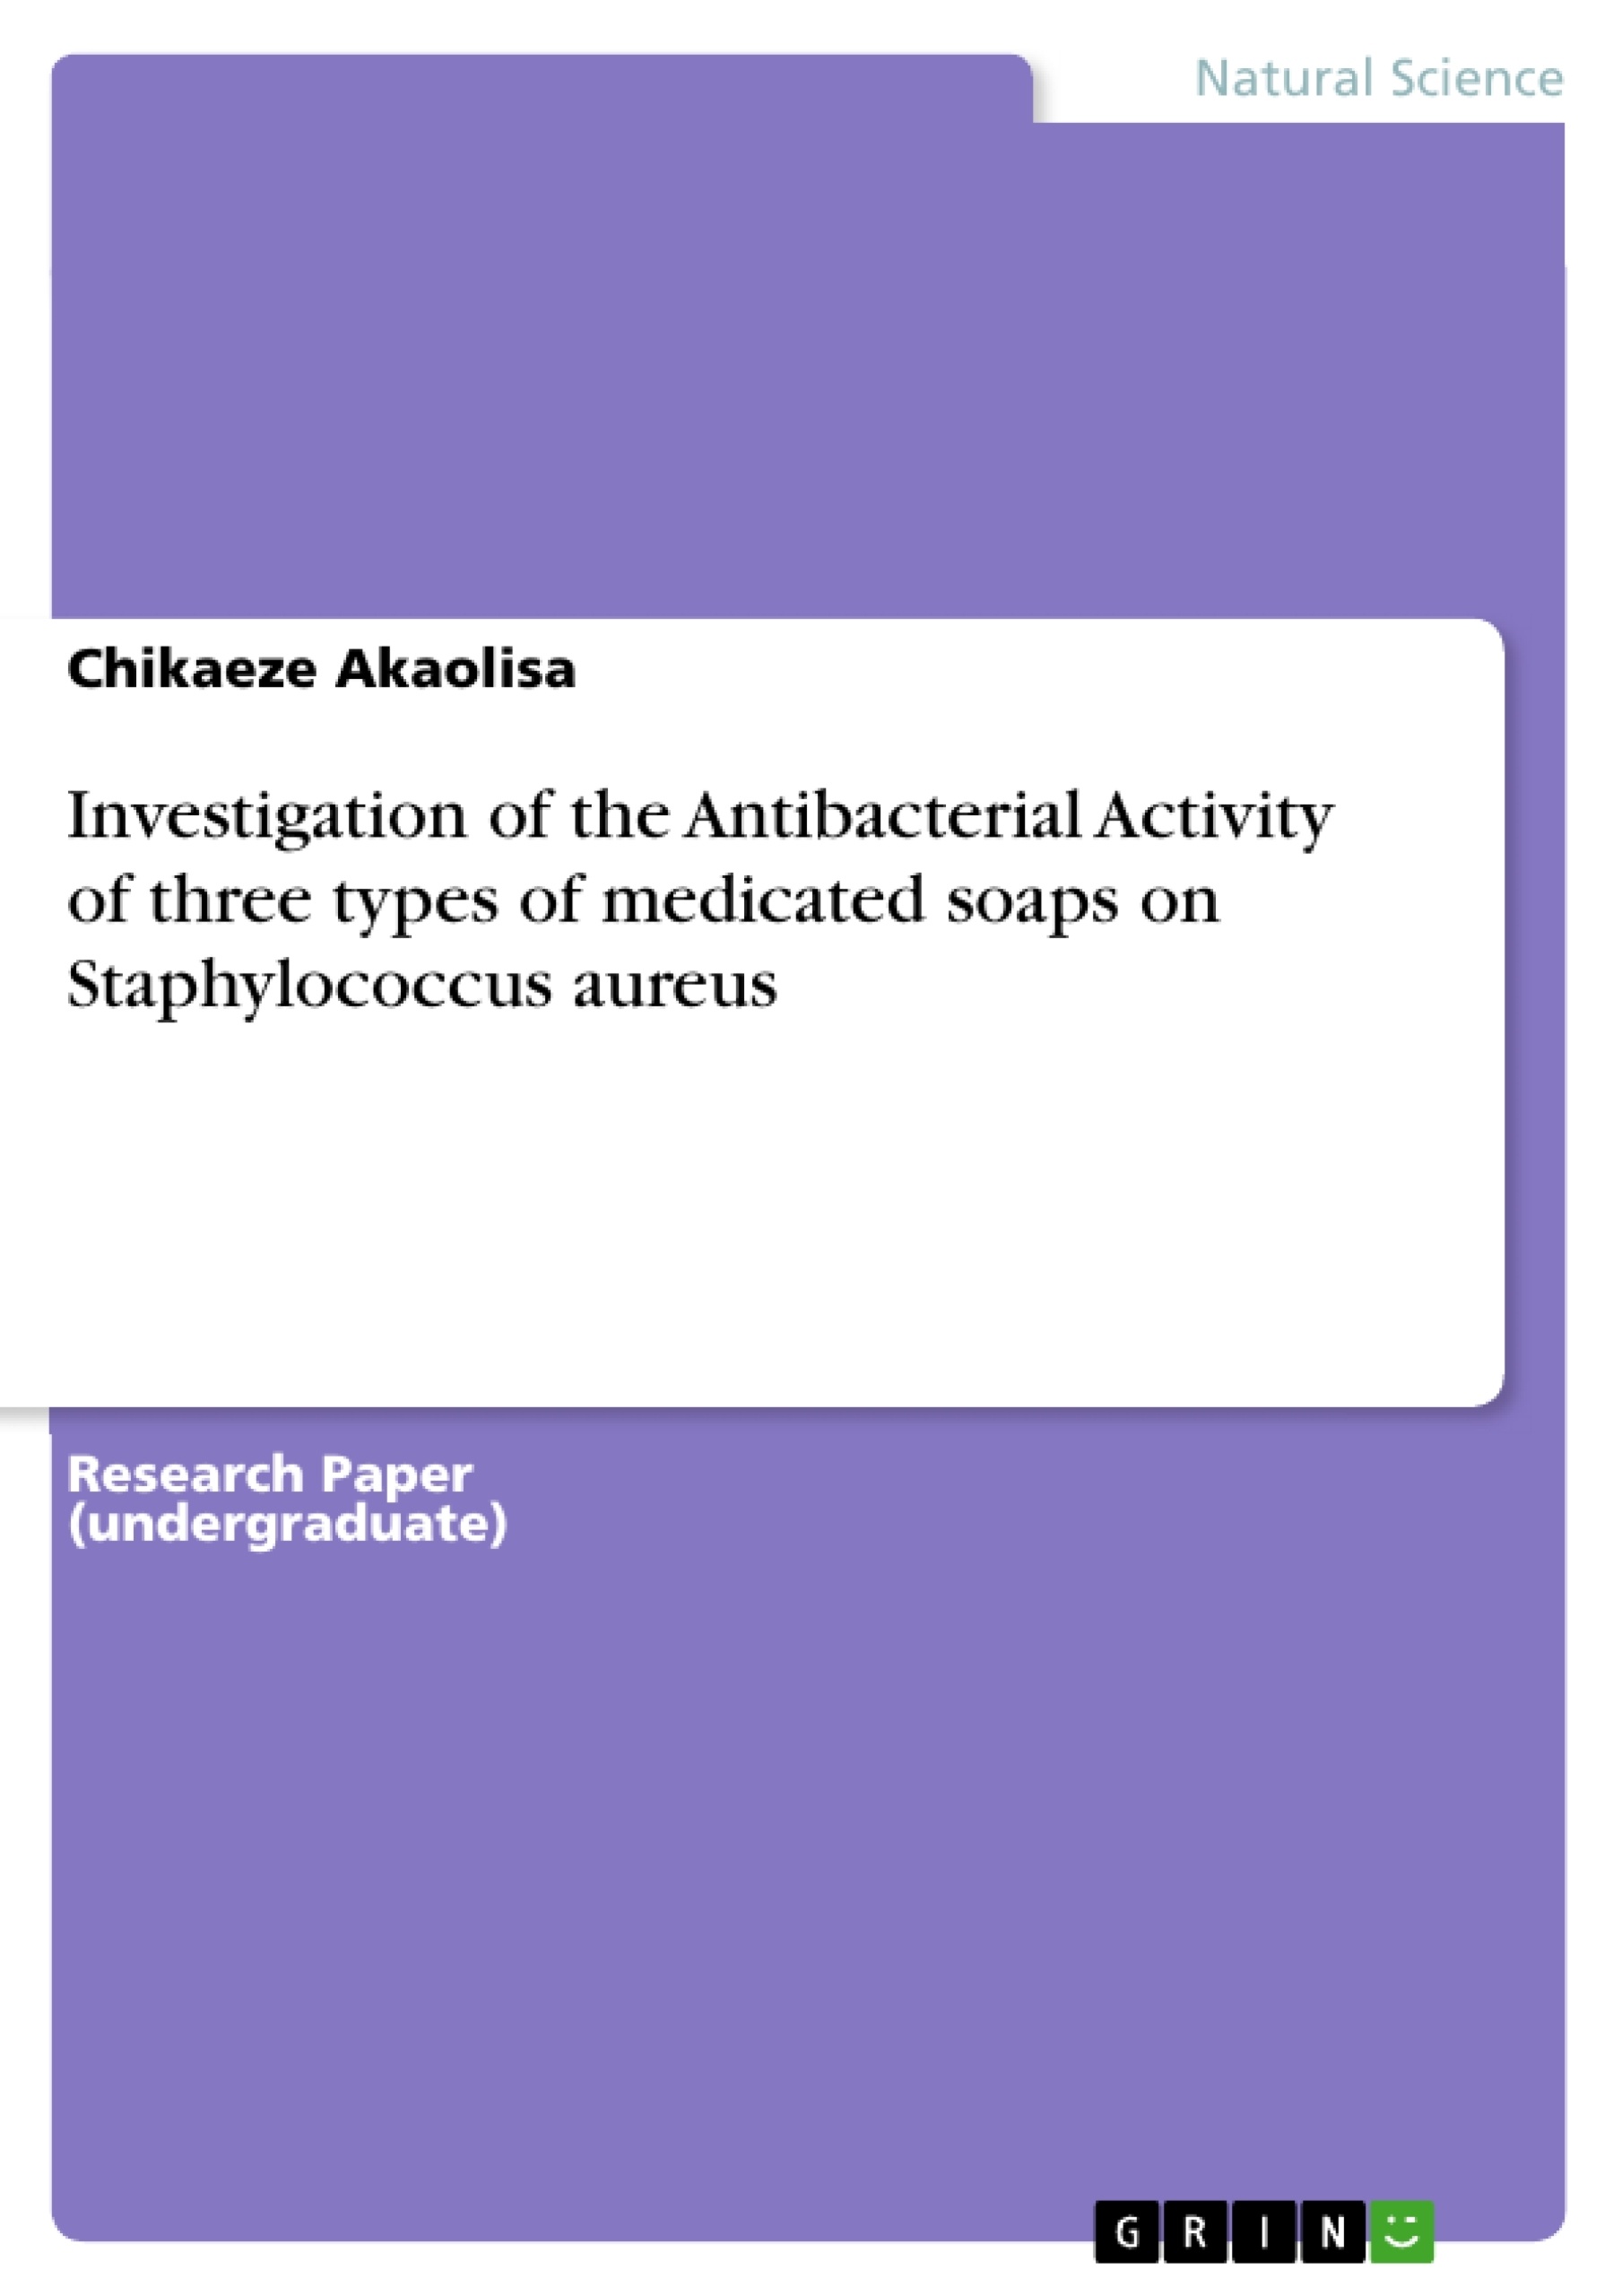 Titre: Investigation of the Antibacterial Activity of three types of medicated soaps on Staphylococcus aureus